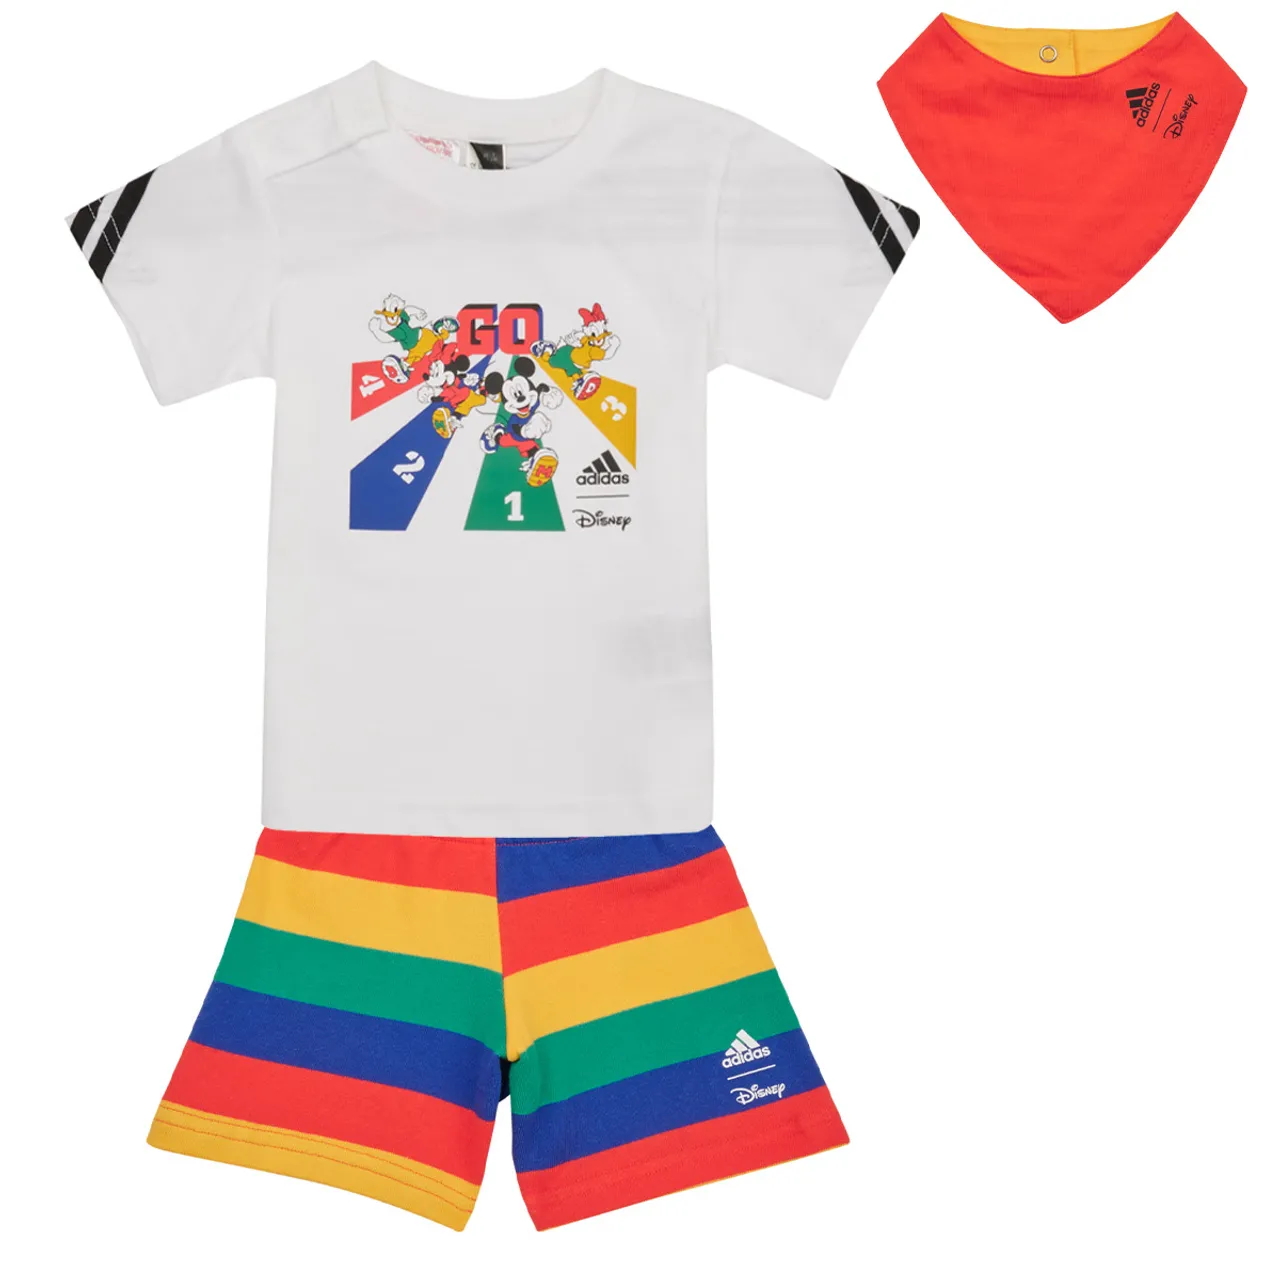 adidas  I DY MM G SET  boys's Sets & Outfits in Multicolour